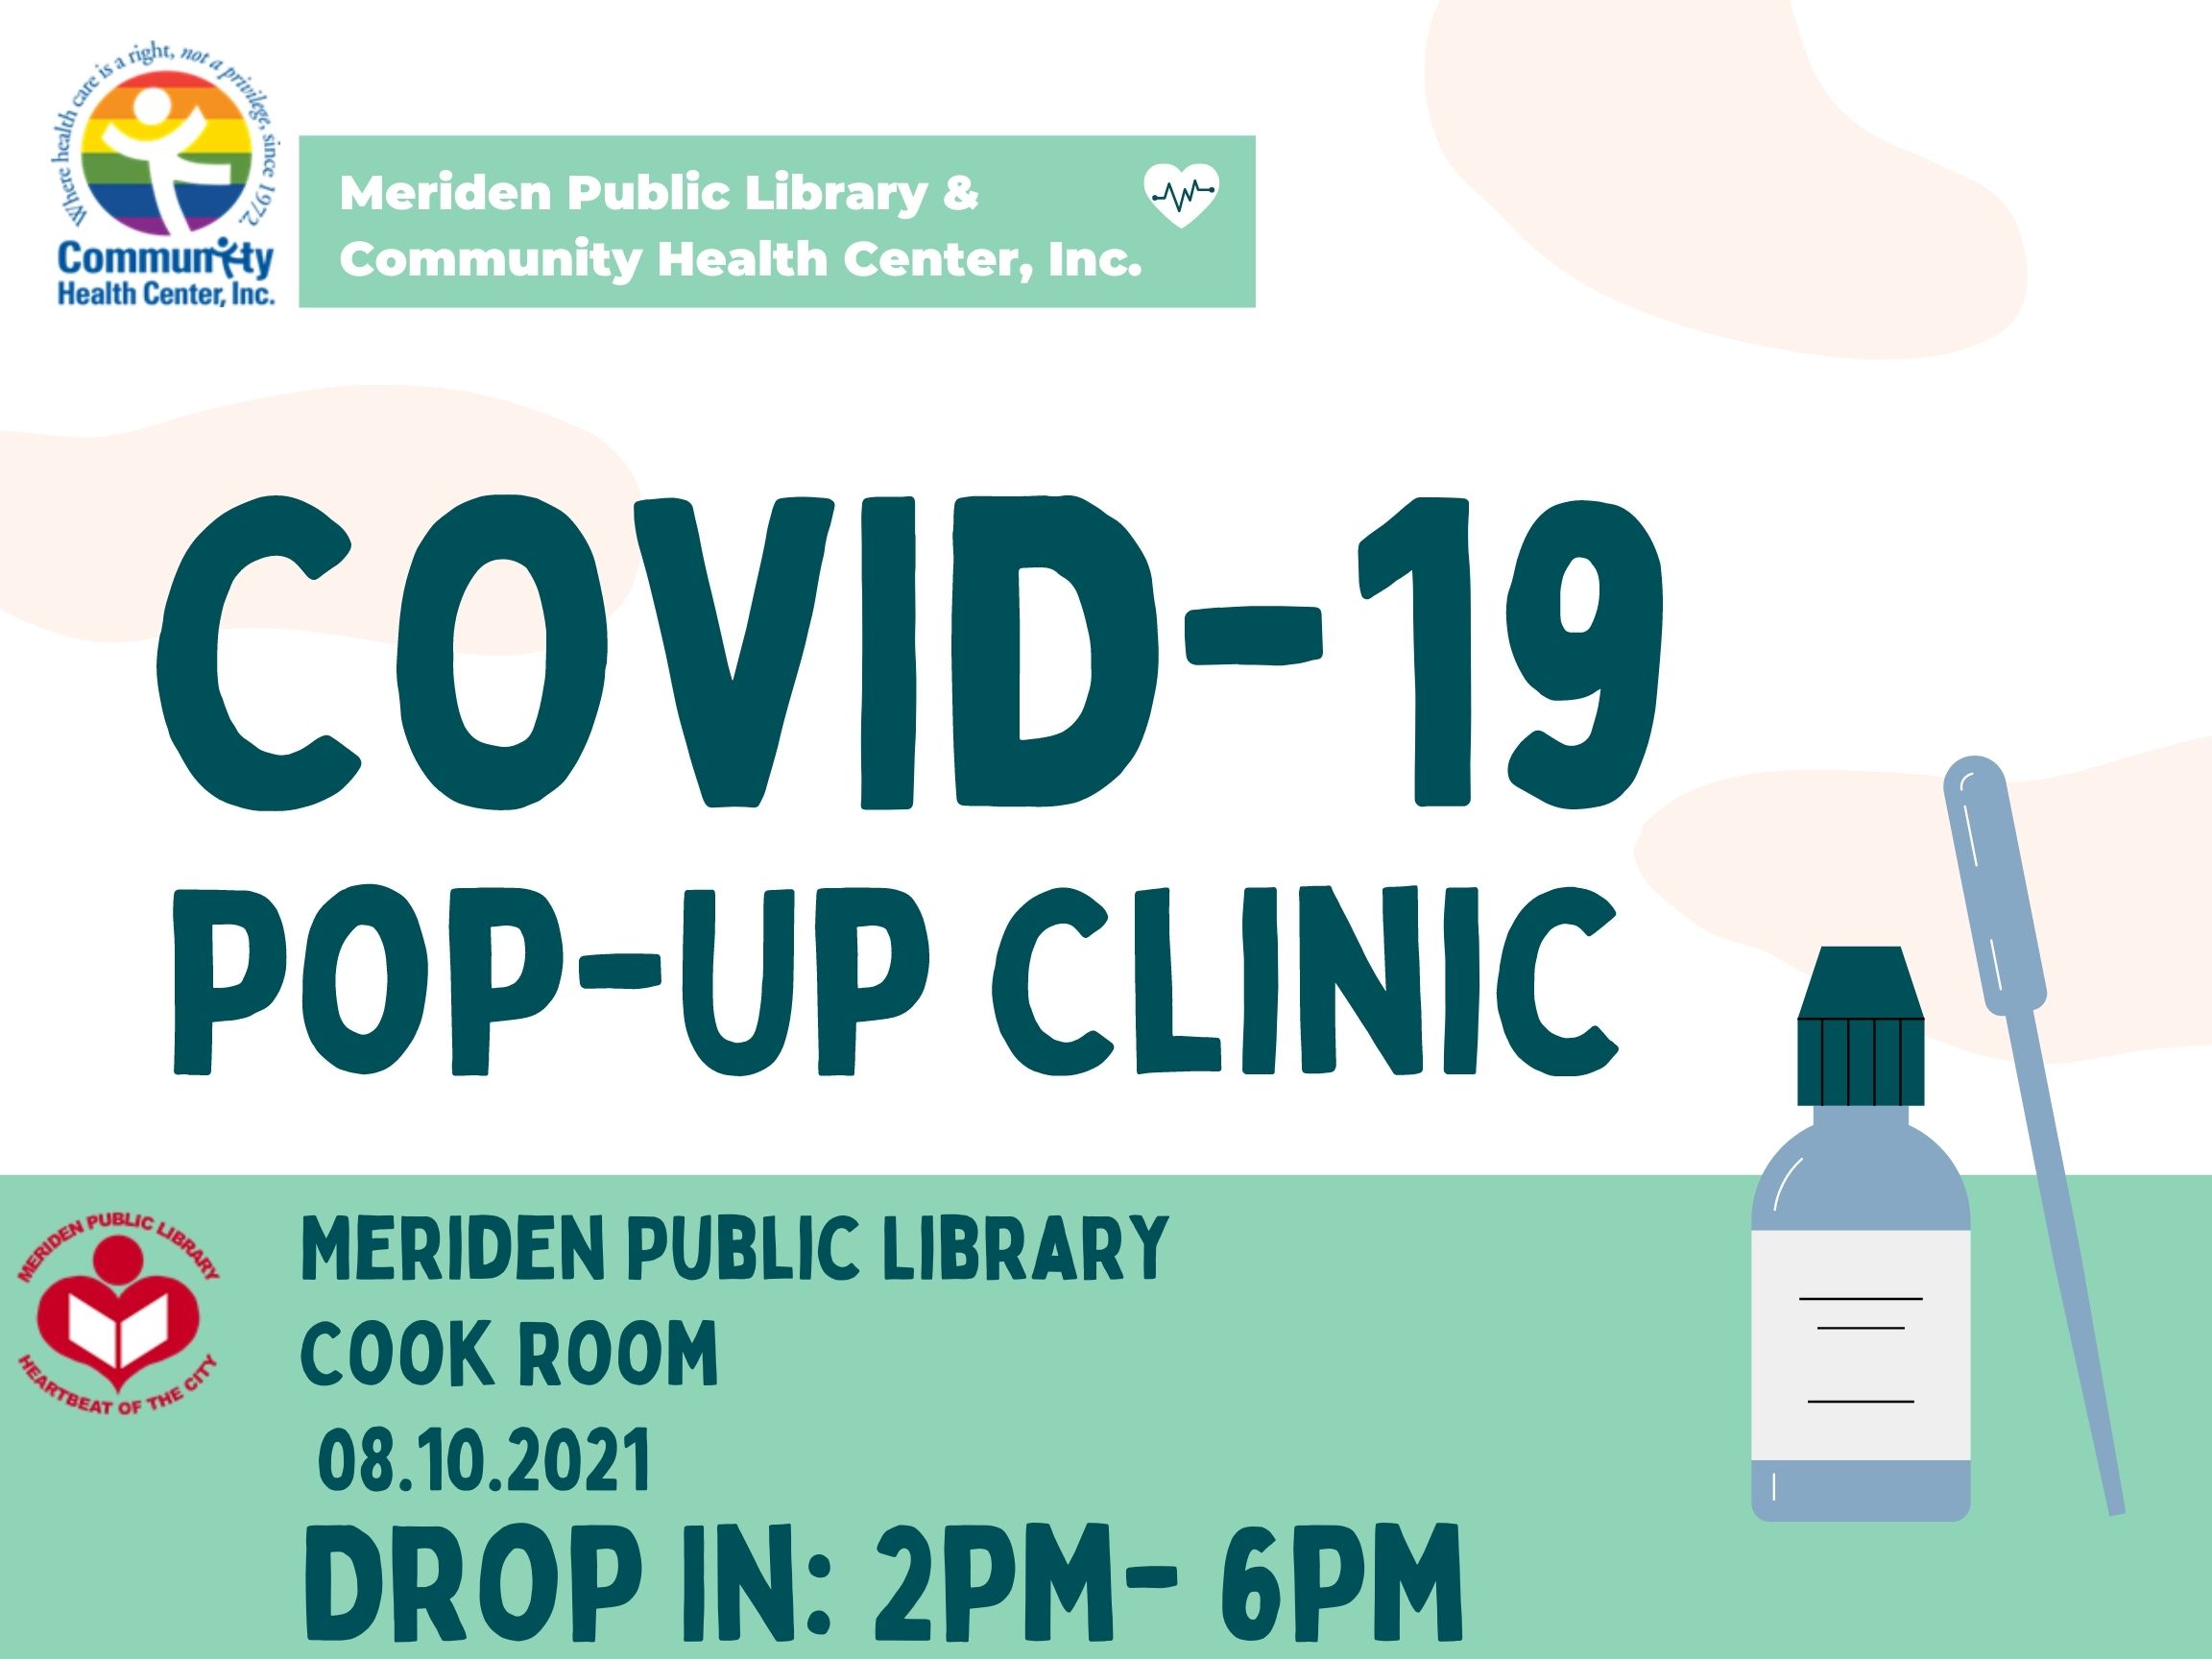 COVID-19 Pop-up Clinic